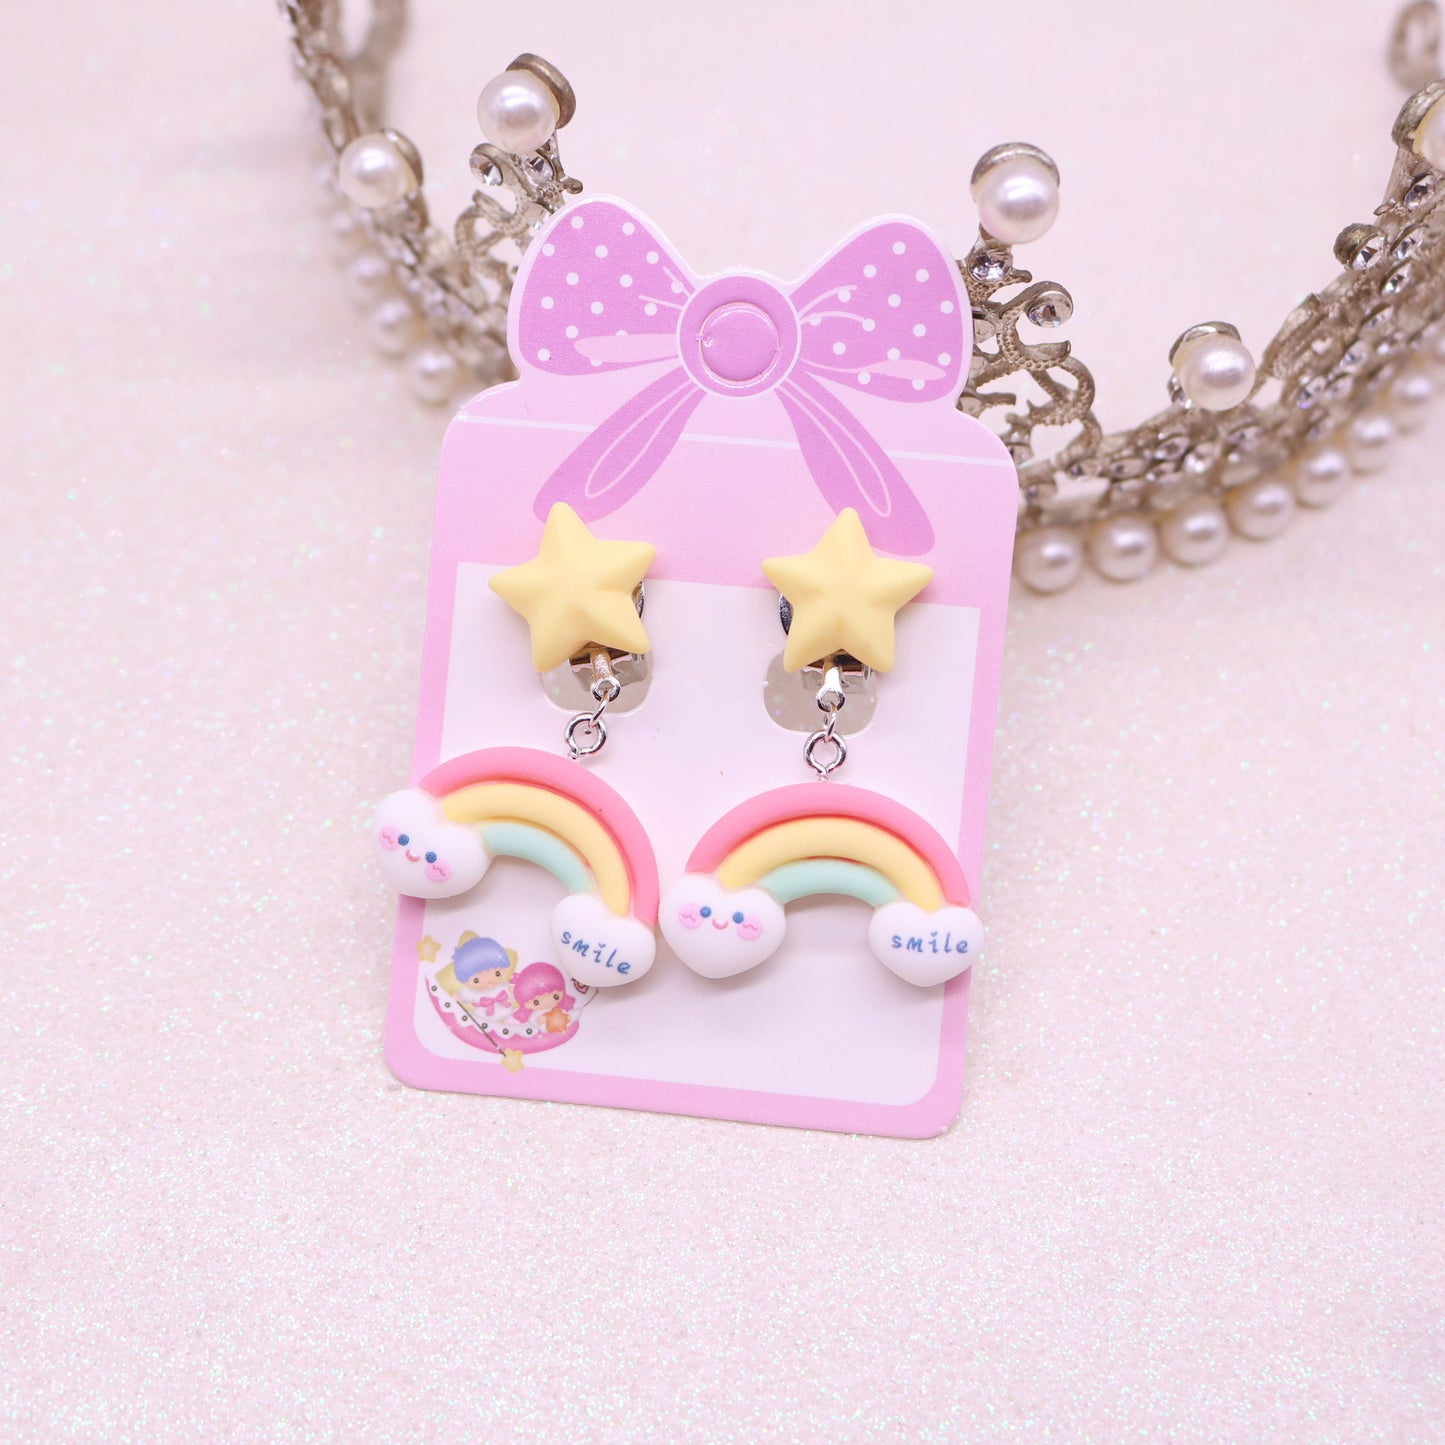 Kawaii Clip on Earrings with Surgical Steel Clip